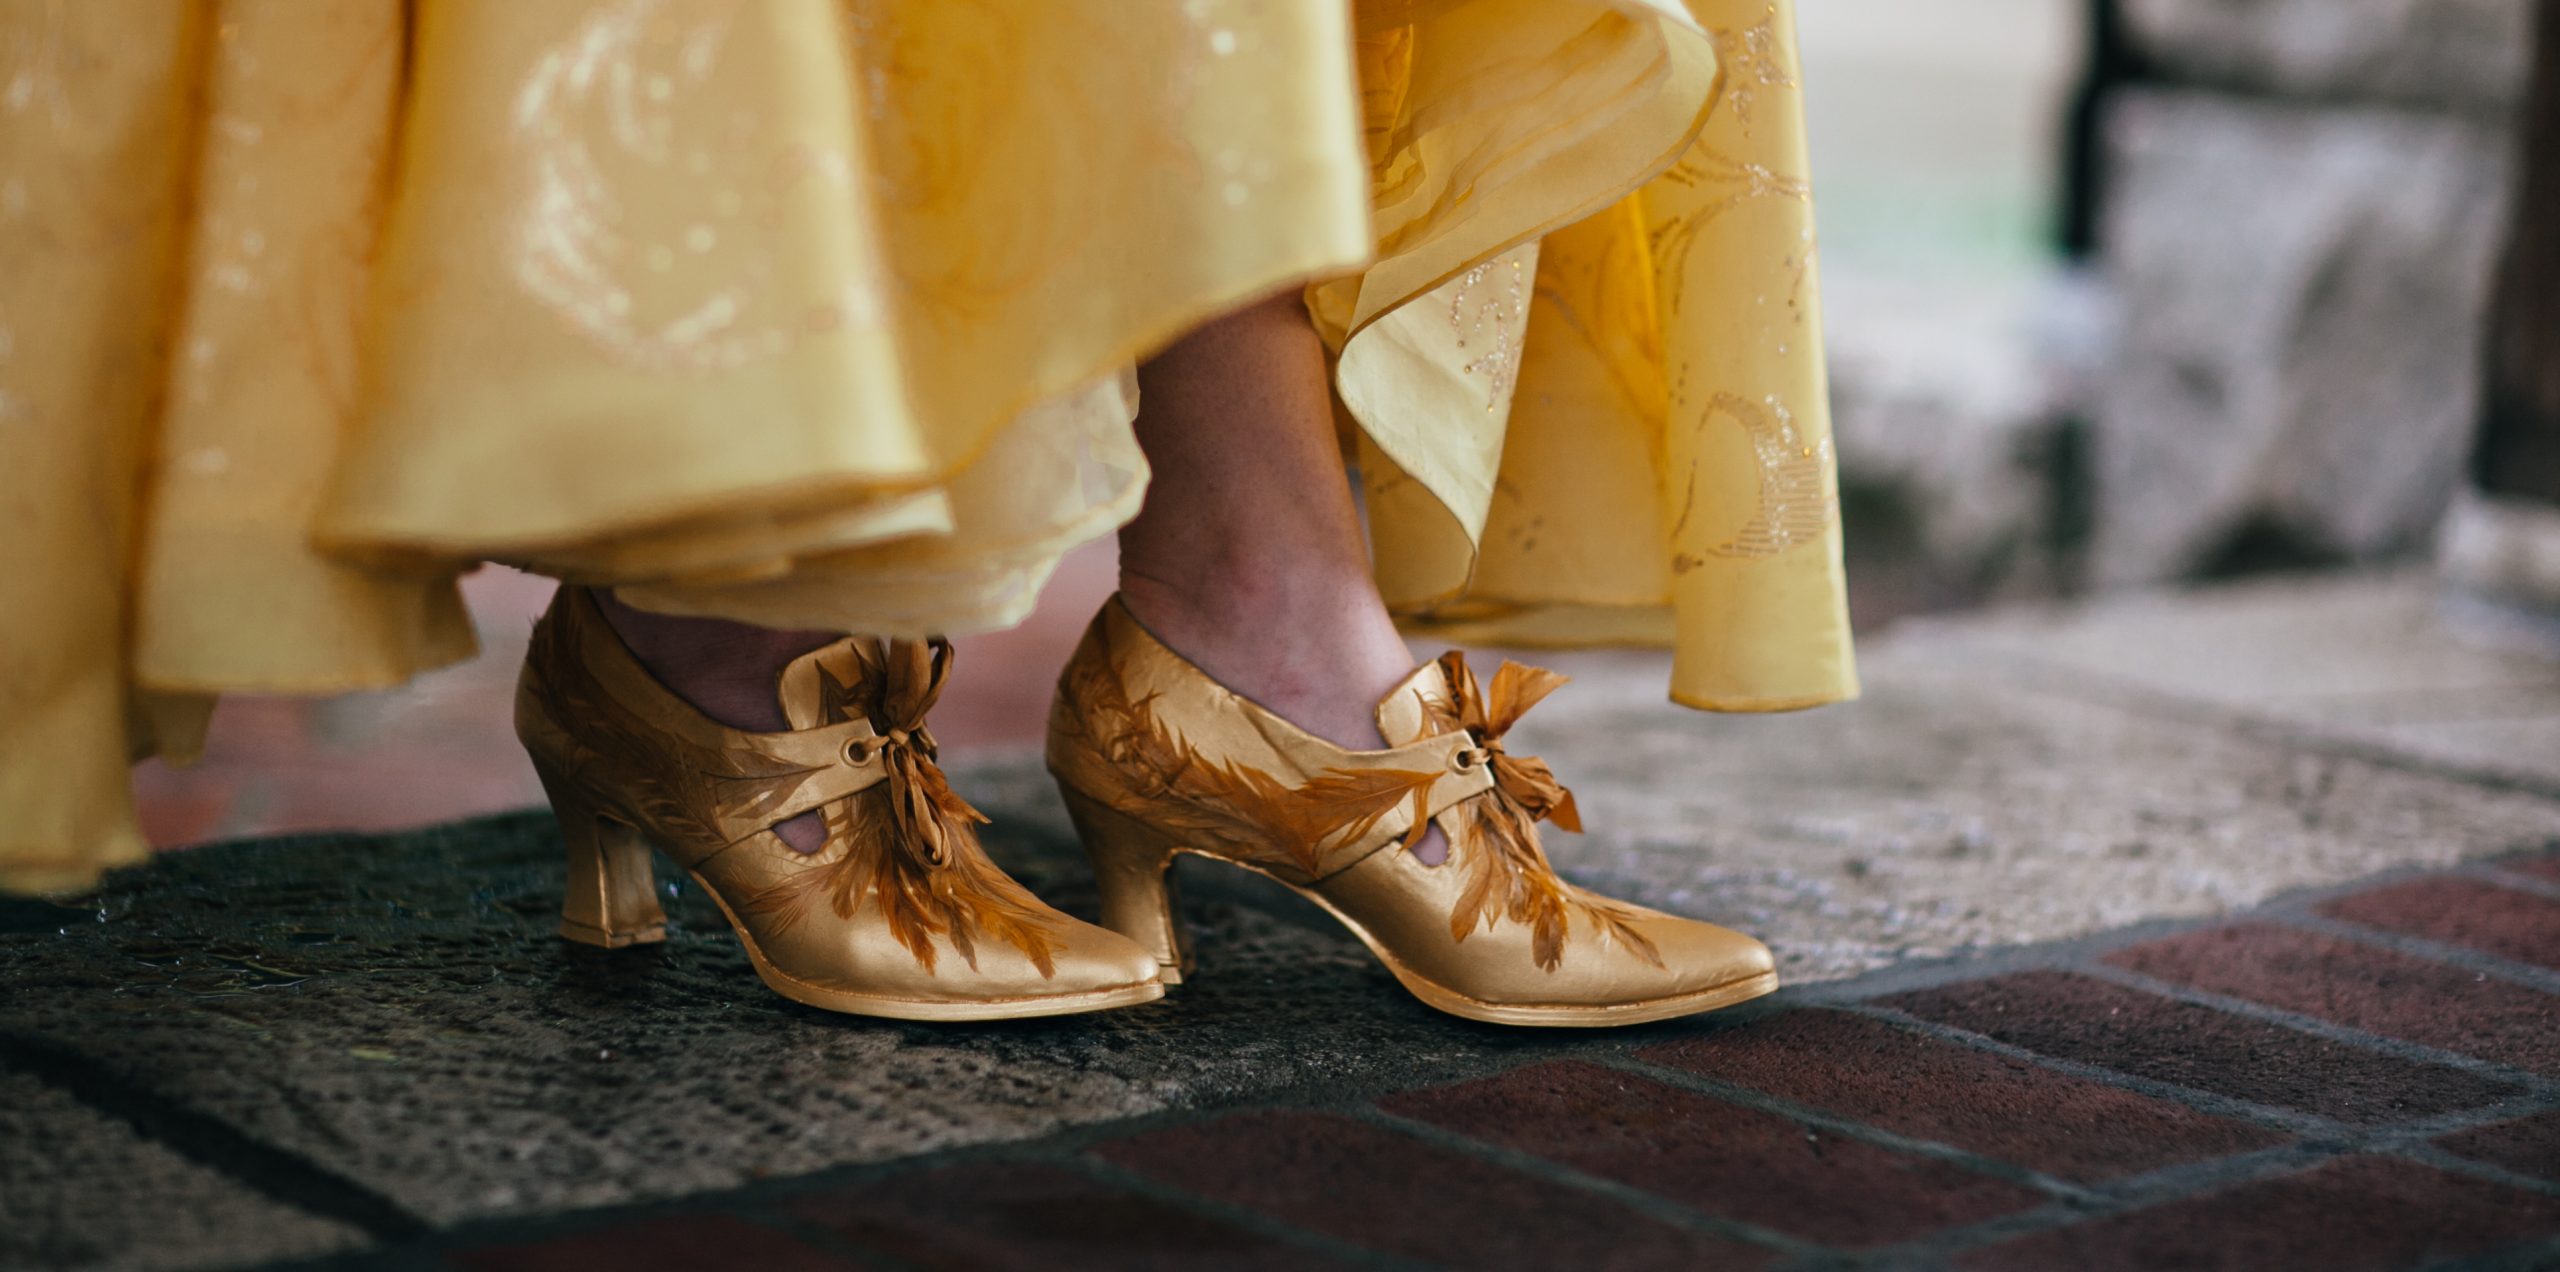 Feathers & All – Replicating Belle’s Shoes